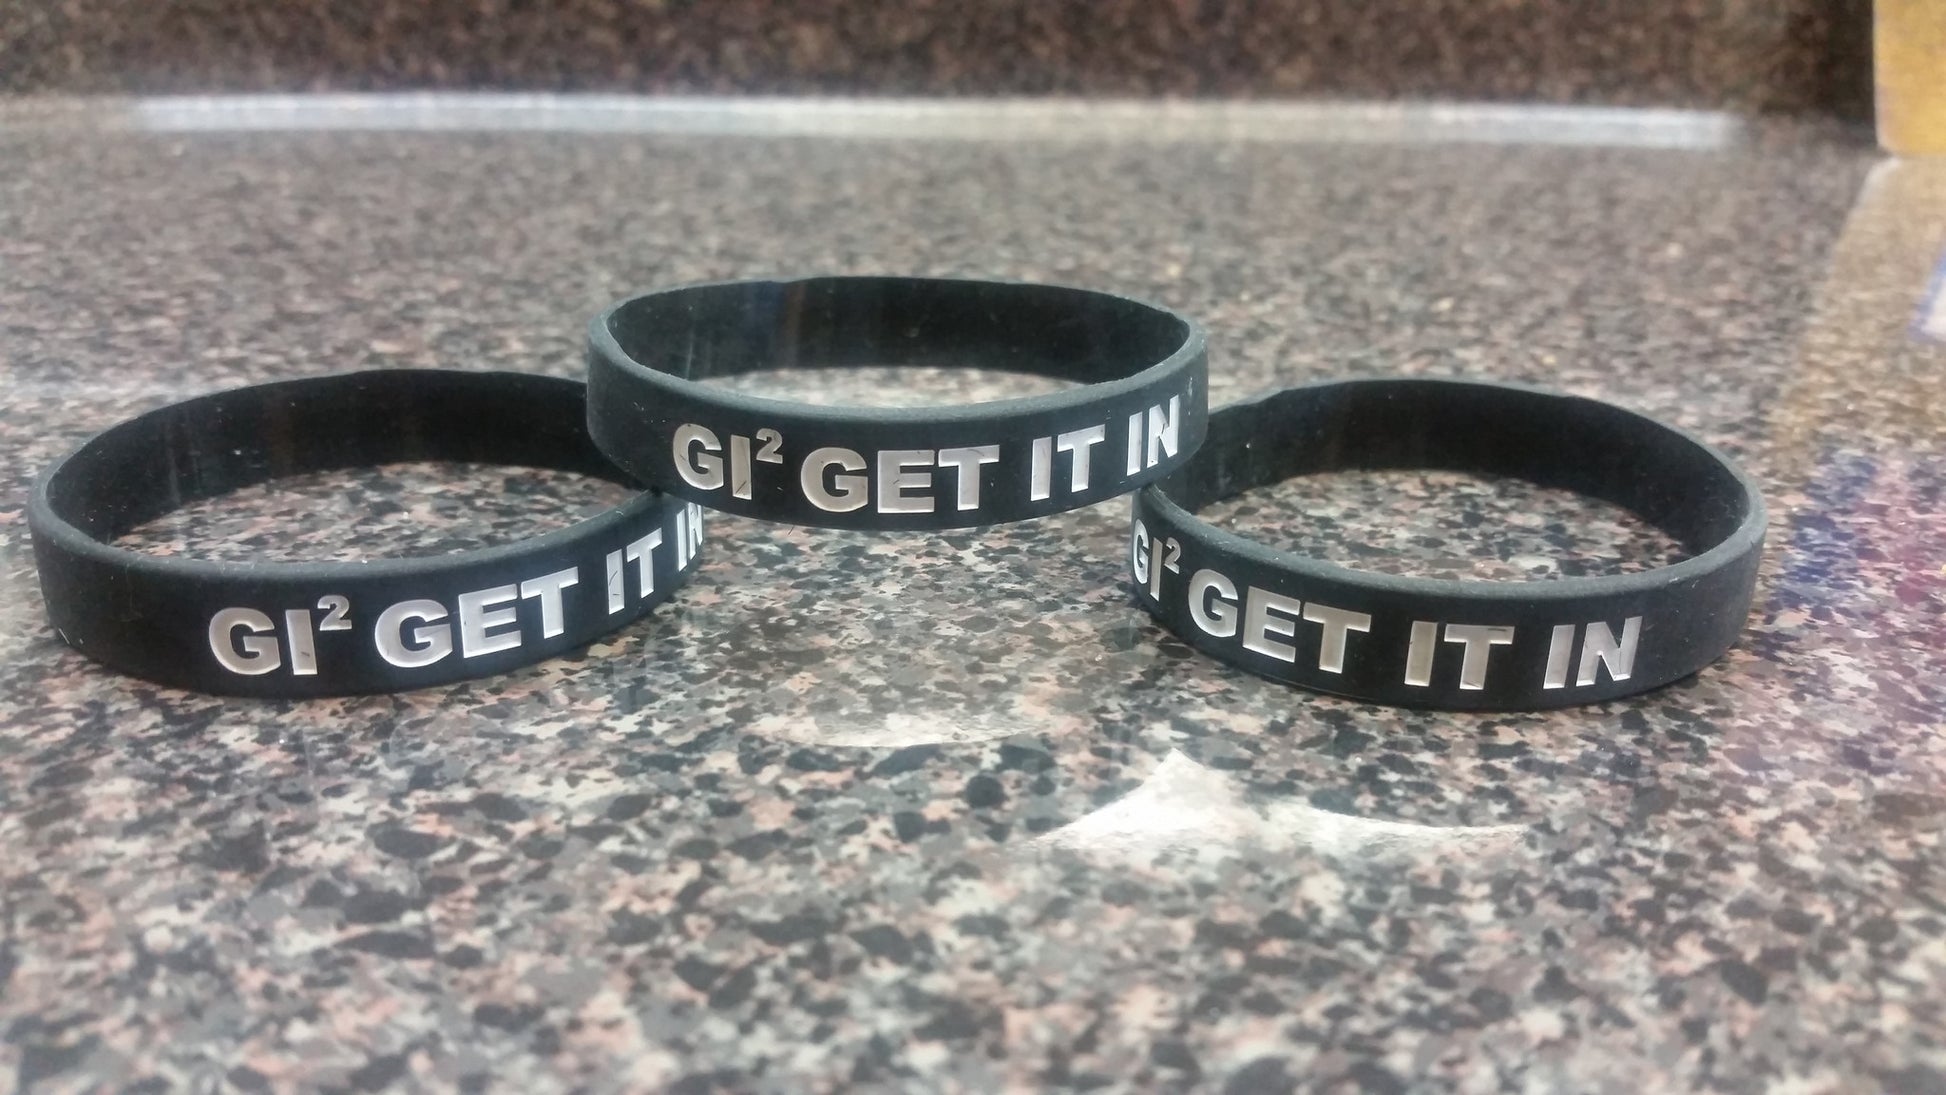 Get it in rubber wristbands - GET IT IN Apparel